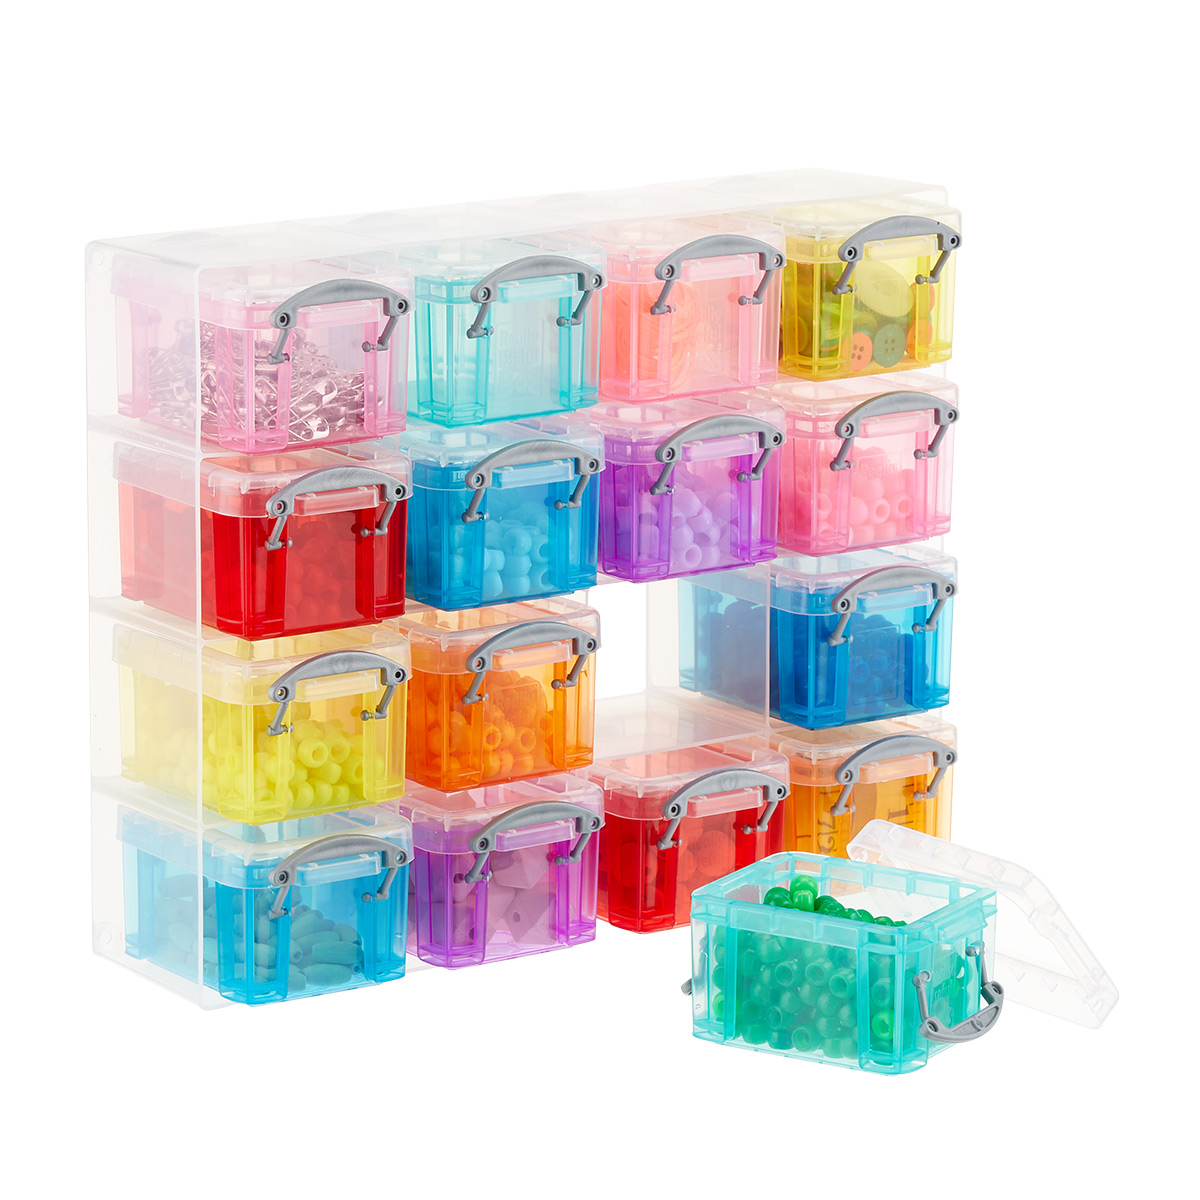 https://www.containerstore.com/catalogimages/460294/10076338-16-latch-box-small-parts-or.jpg